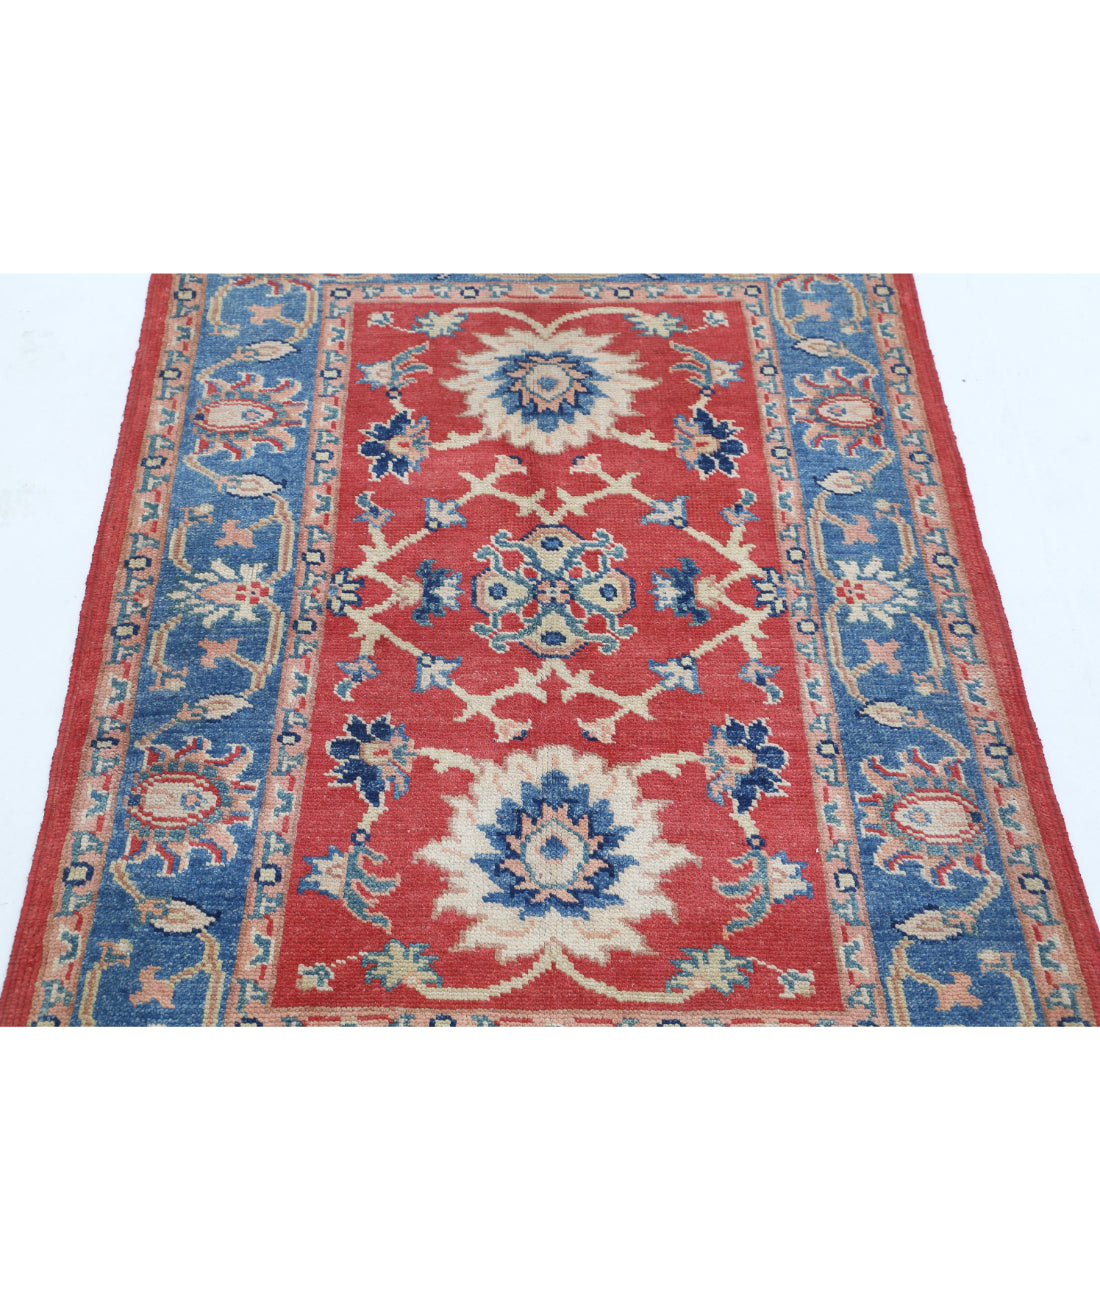 Ziegler 3'1'' X 4'2'' Hand-Knotted Wool Rug 3'1'' x 4'2'' (93 X 125) / Red / Blue